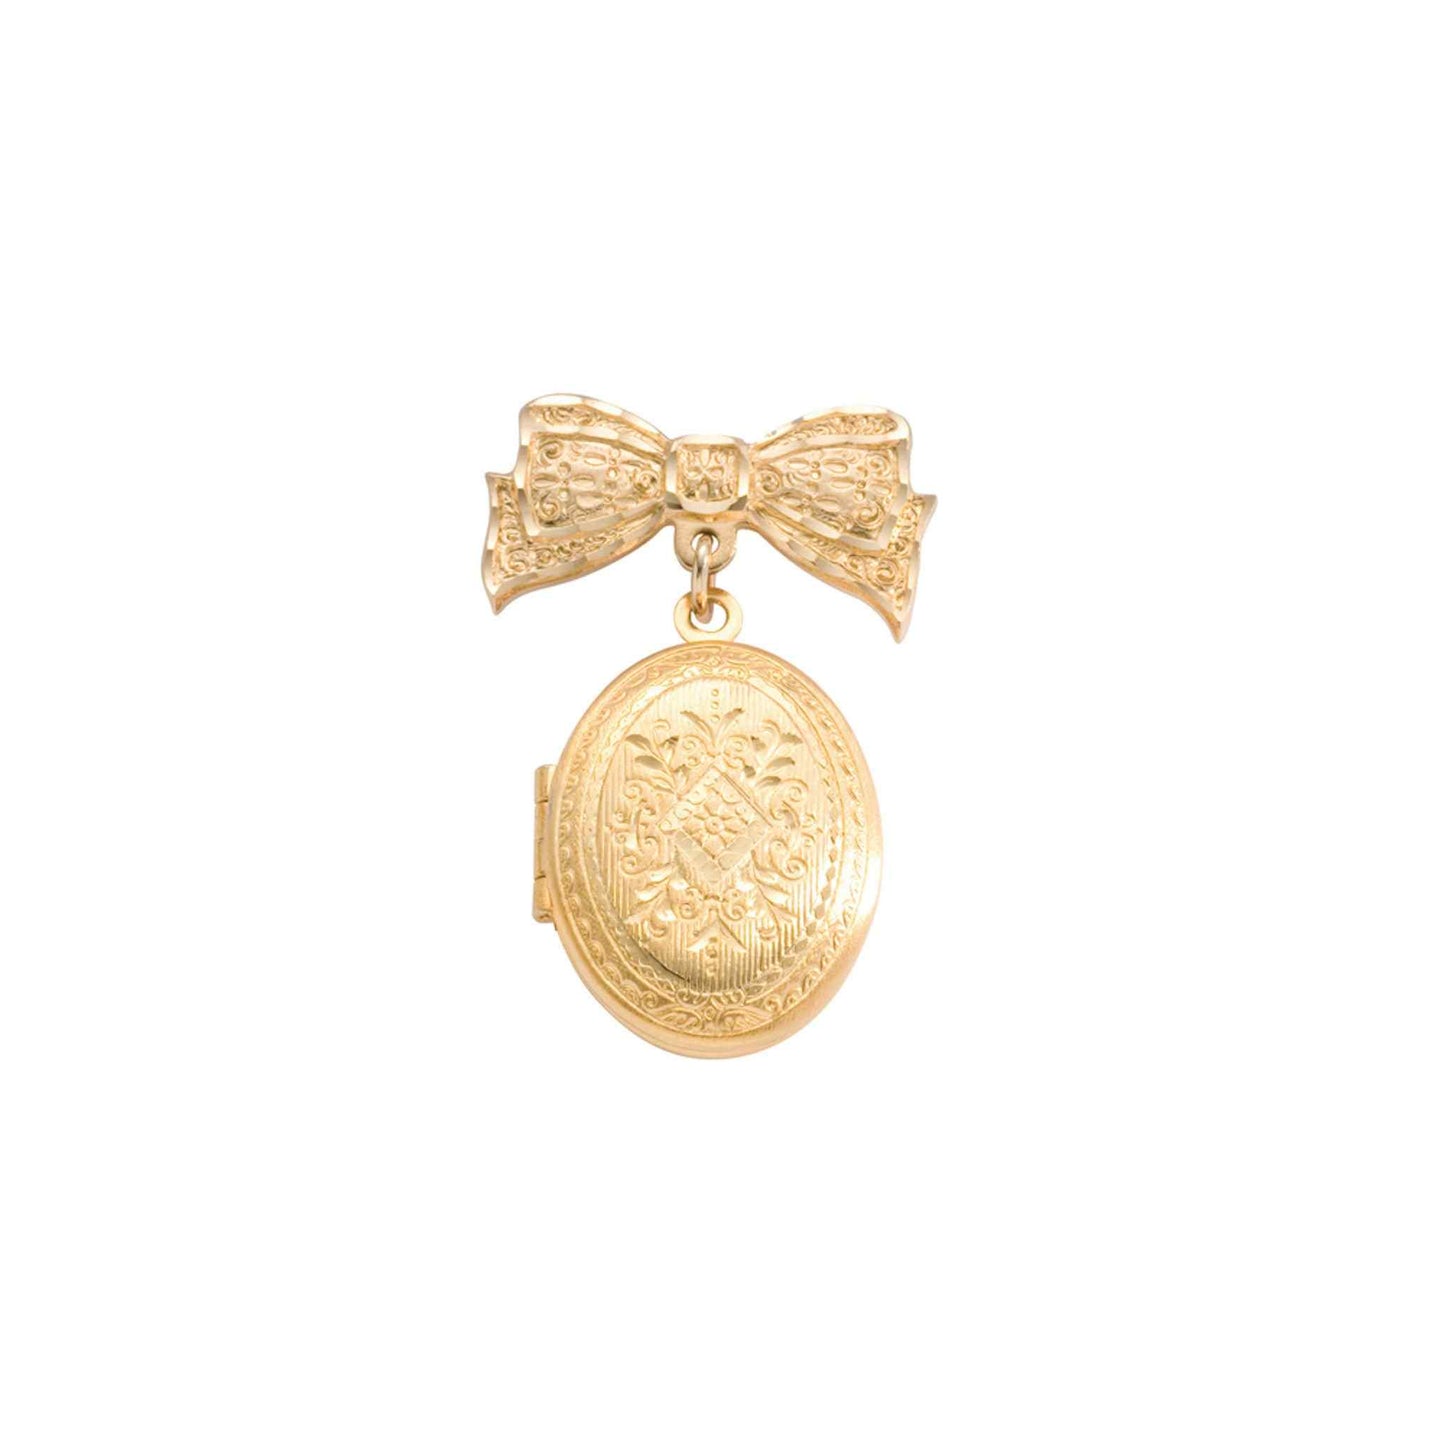 A bow pin and oval locket with bezel inserts displayed on a neutral white background.